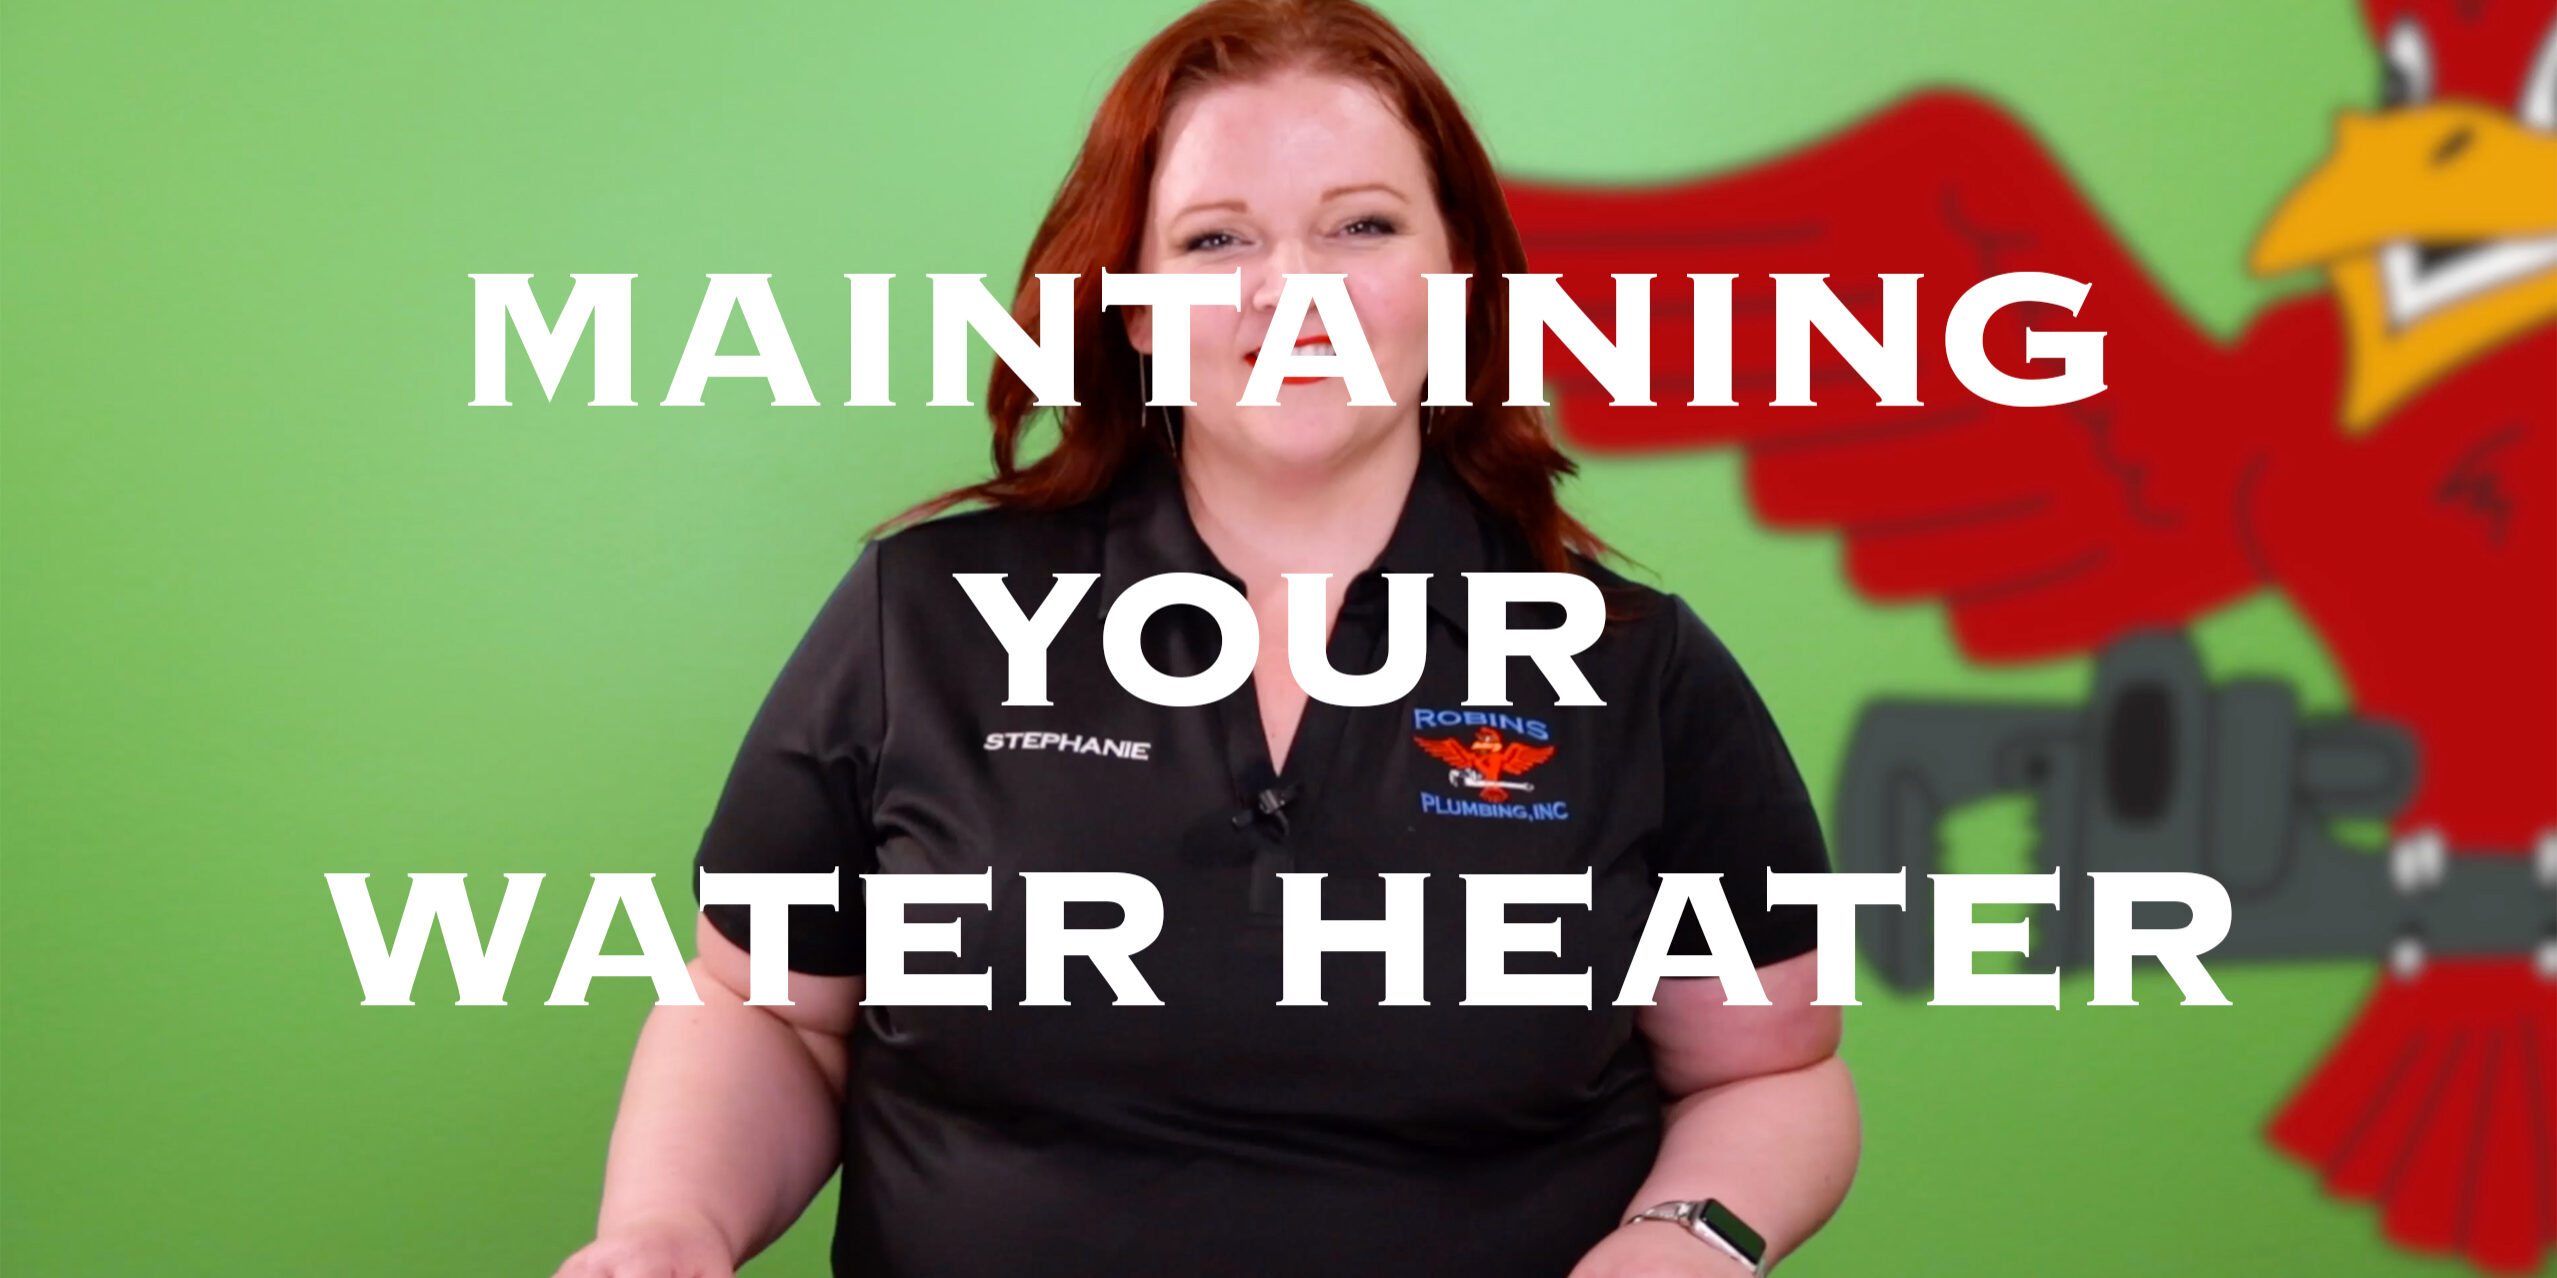 Cover photo for blog and video "Maintaining Your Water Heater"